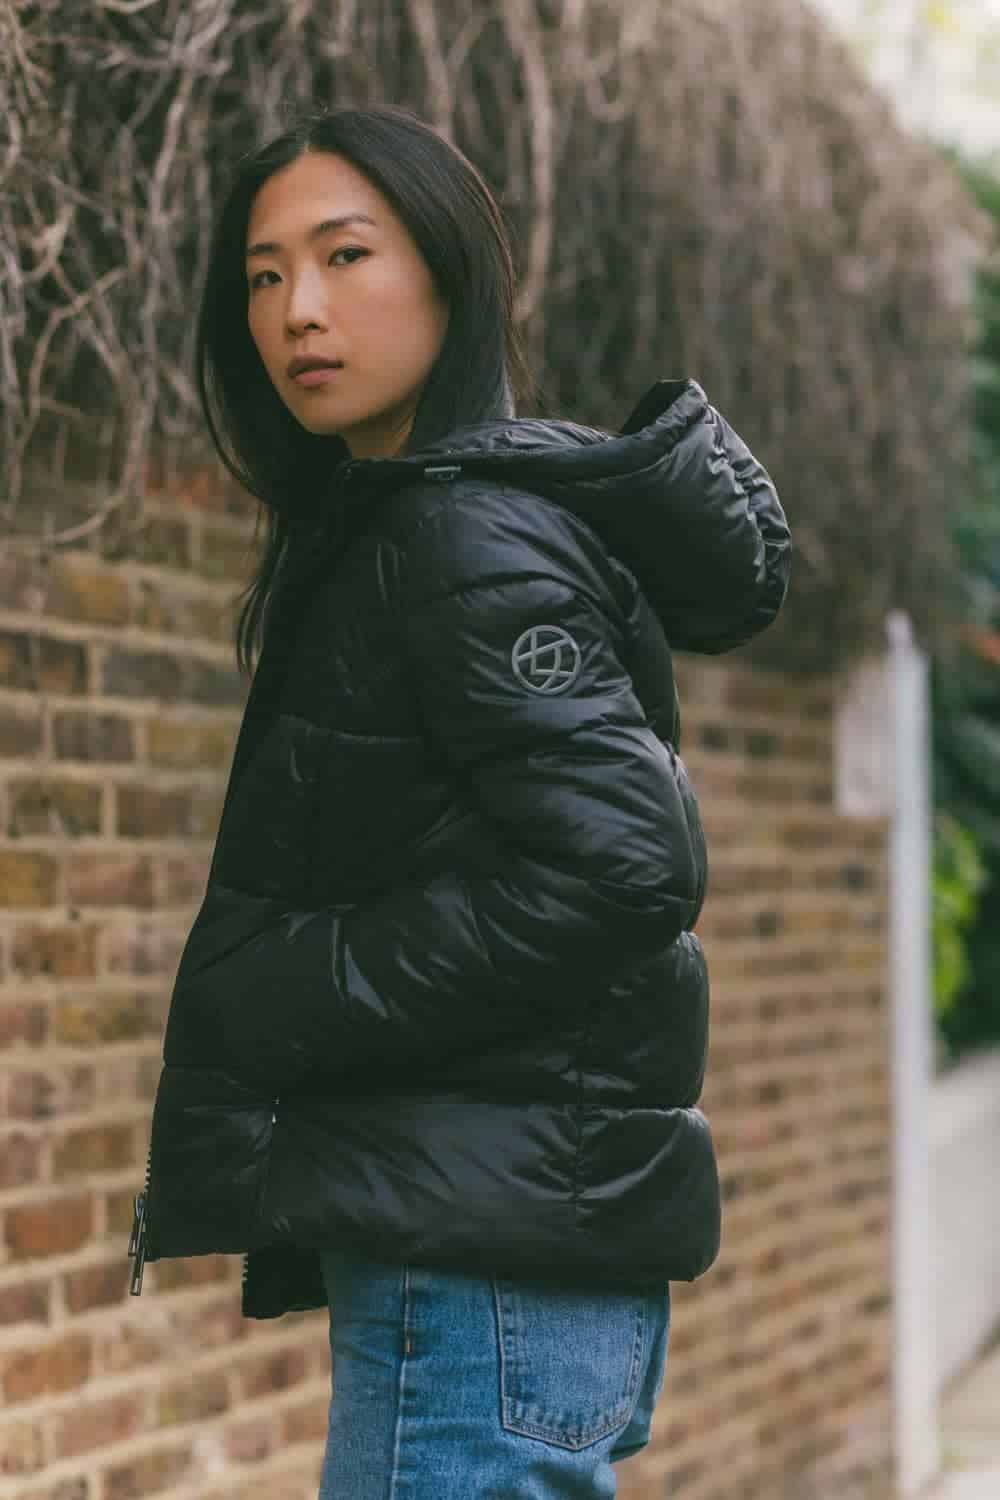 Person wearing black puffer jacket and jeans standing in front of brick wall